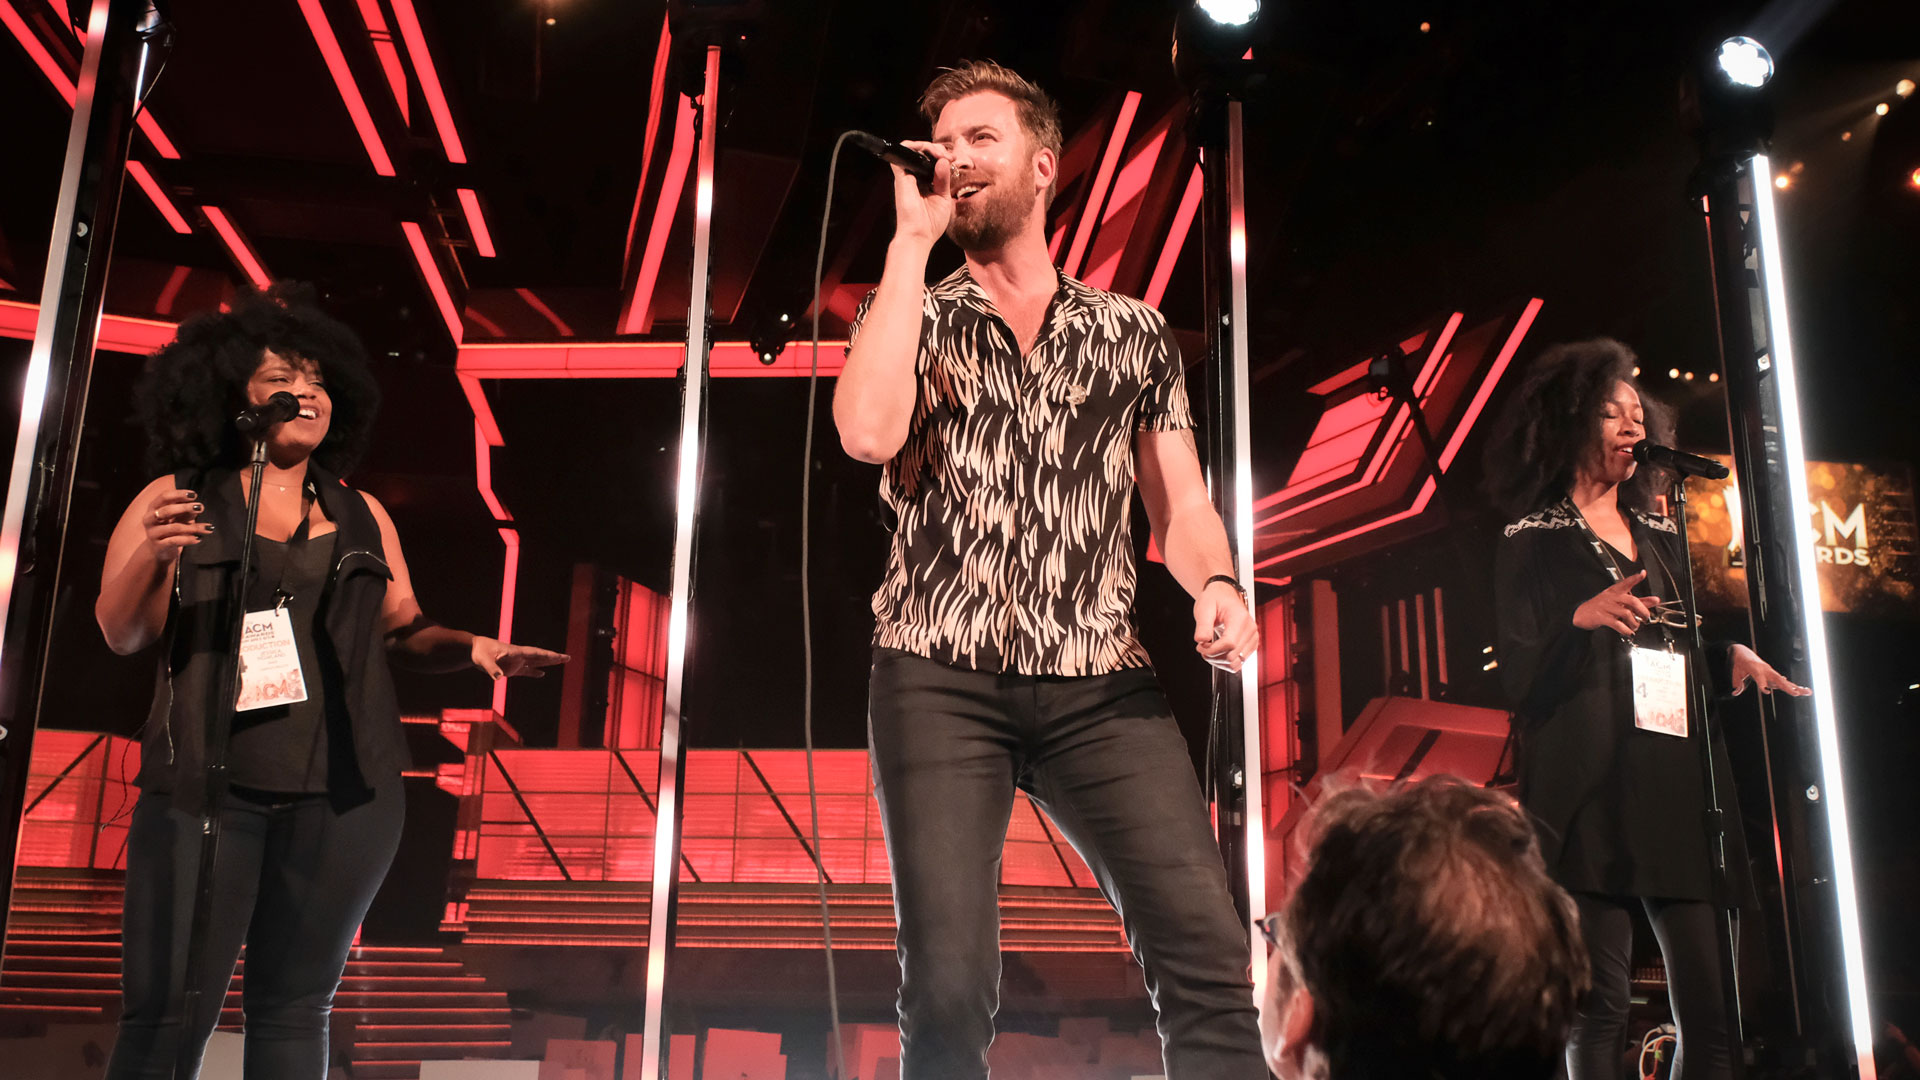 Charles Kelley has a great time while his back-up dancers boogie down behind him.